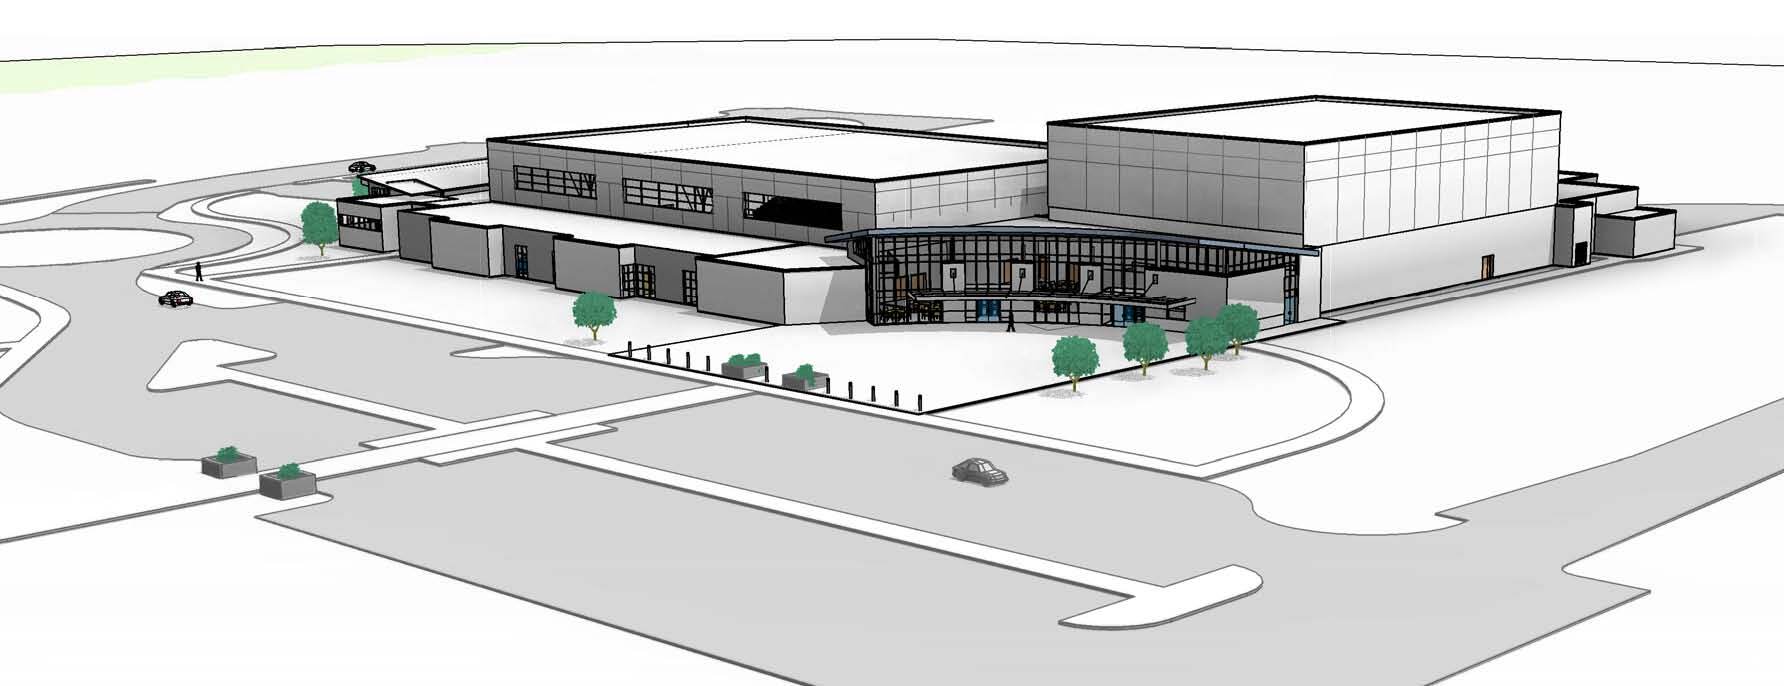 Rendering Design Aerial View of the Arts and Athletic Center